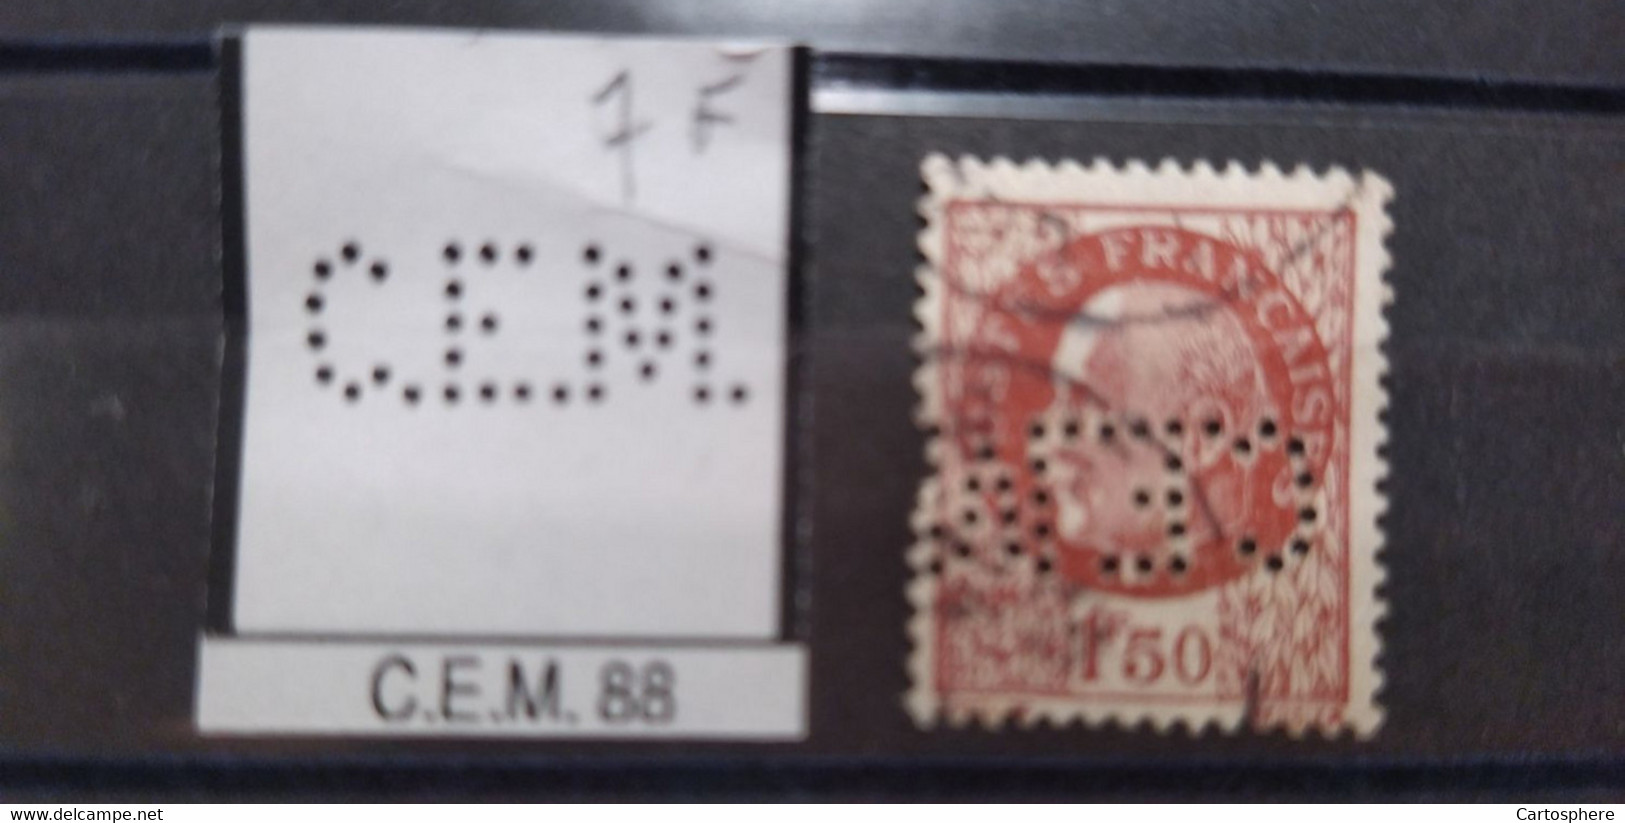 FRANCE TIMBRE C.E.M 88 INDICE 7 CEM 88  PERFORE PERFORES PERFIN PERFINS PERFO PERFORATION PERFORIERT - Gebraucht